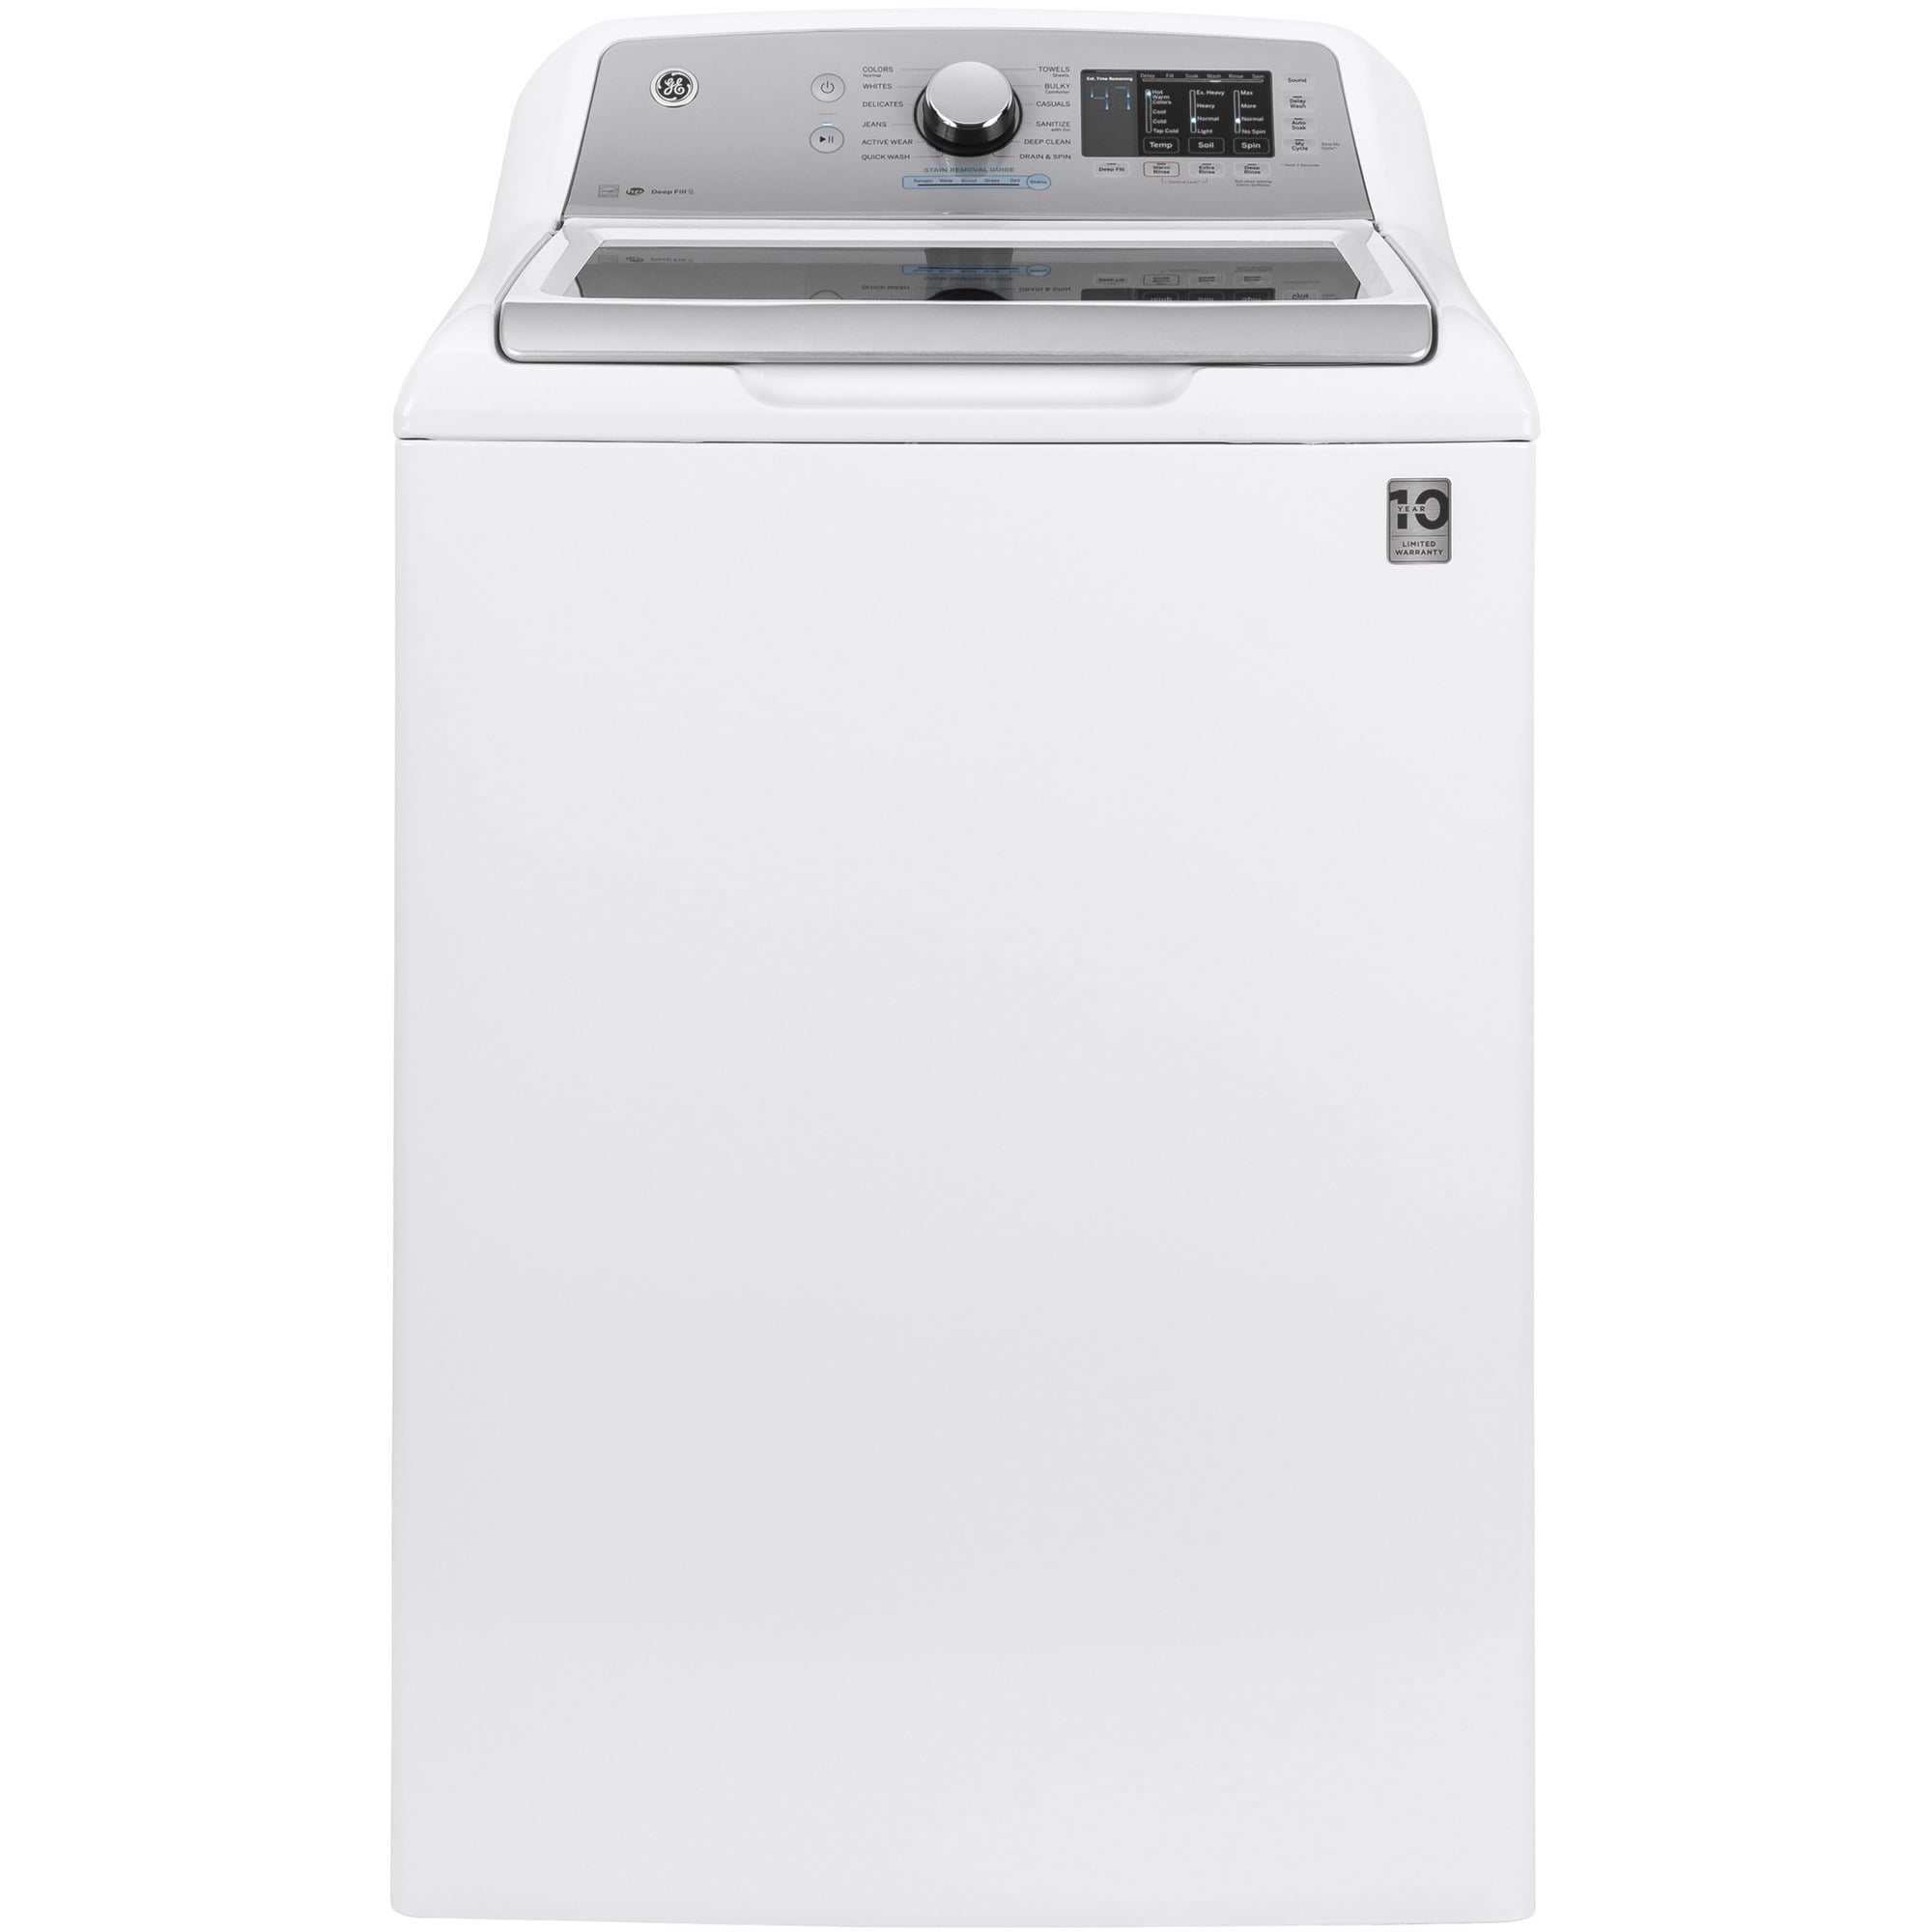 ge-gtw725bsnws-4-6-cu-ft-white-top-load-electric-washer-walmart